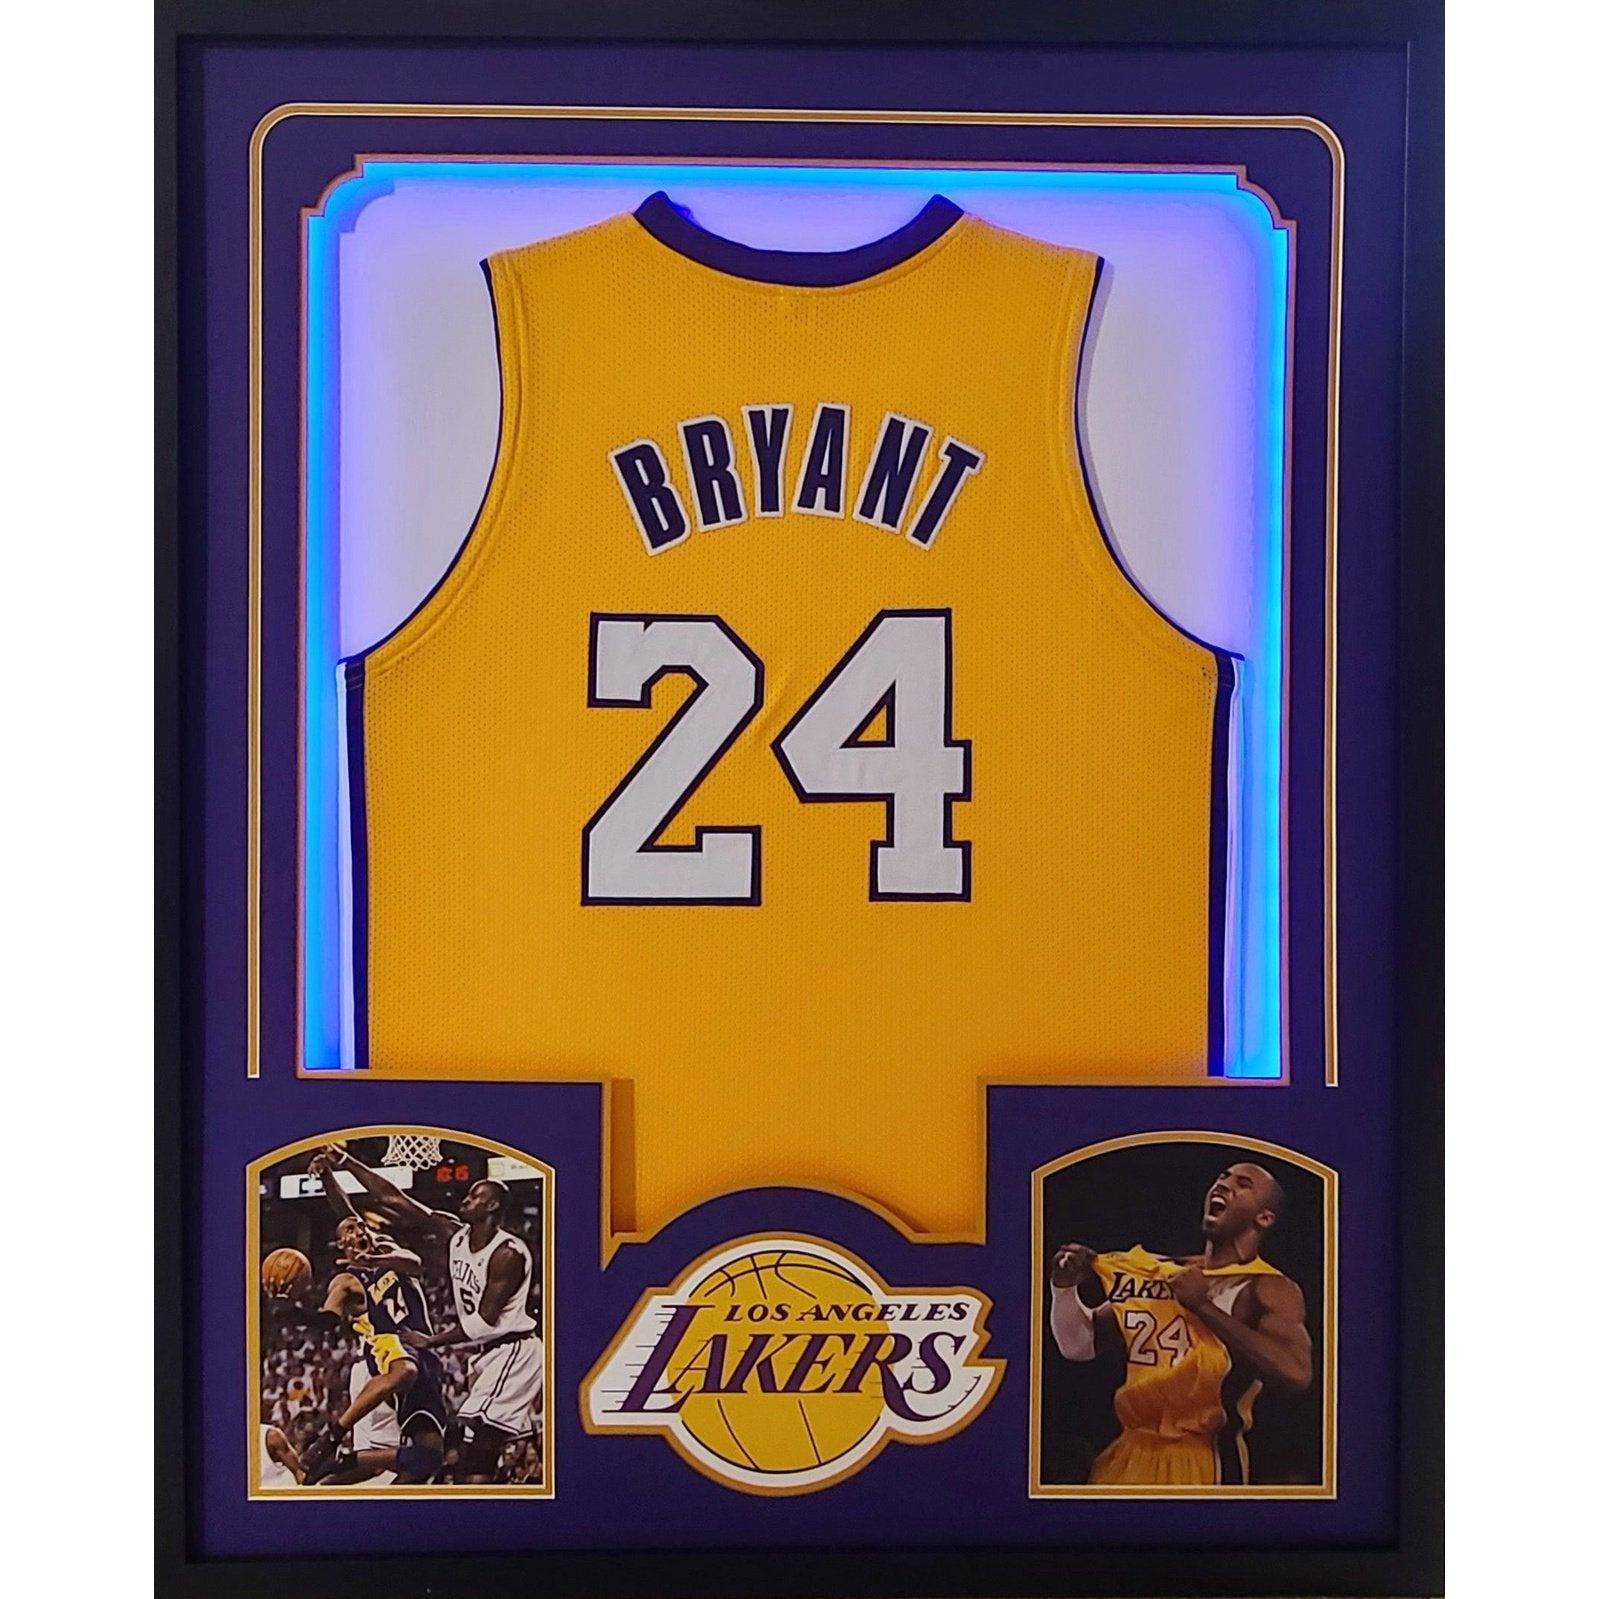 Signed Kobe Bryant Los Angeles Lakers jersey could sell for up to